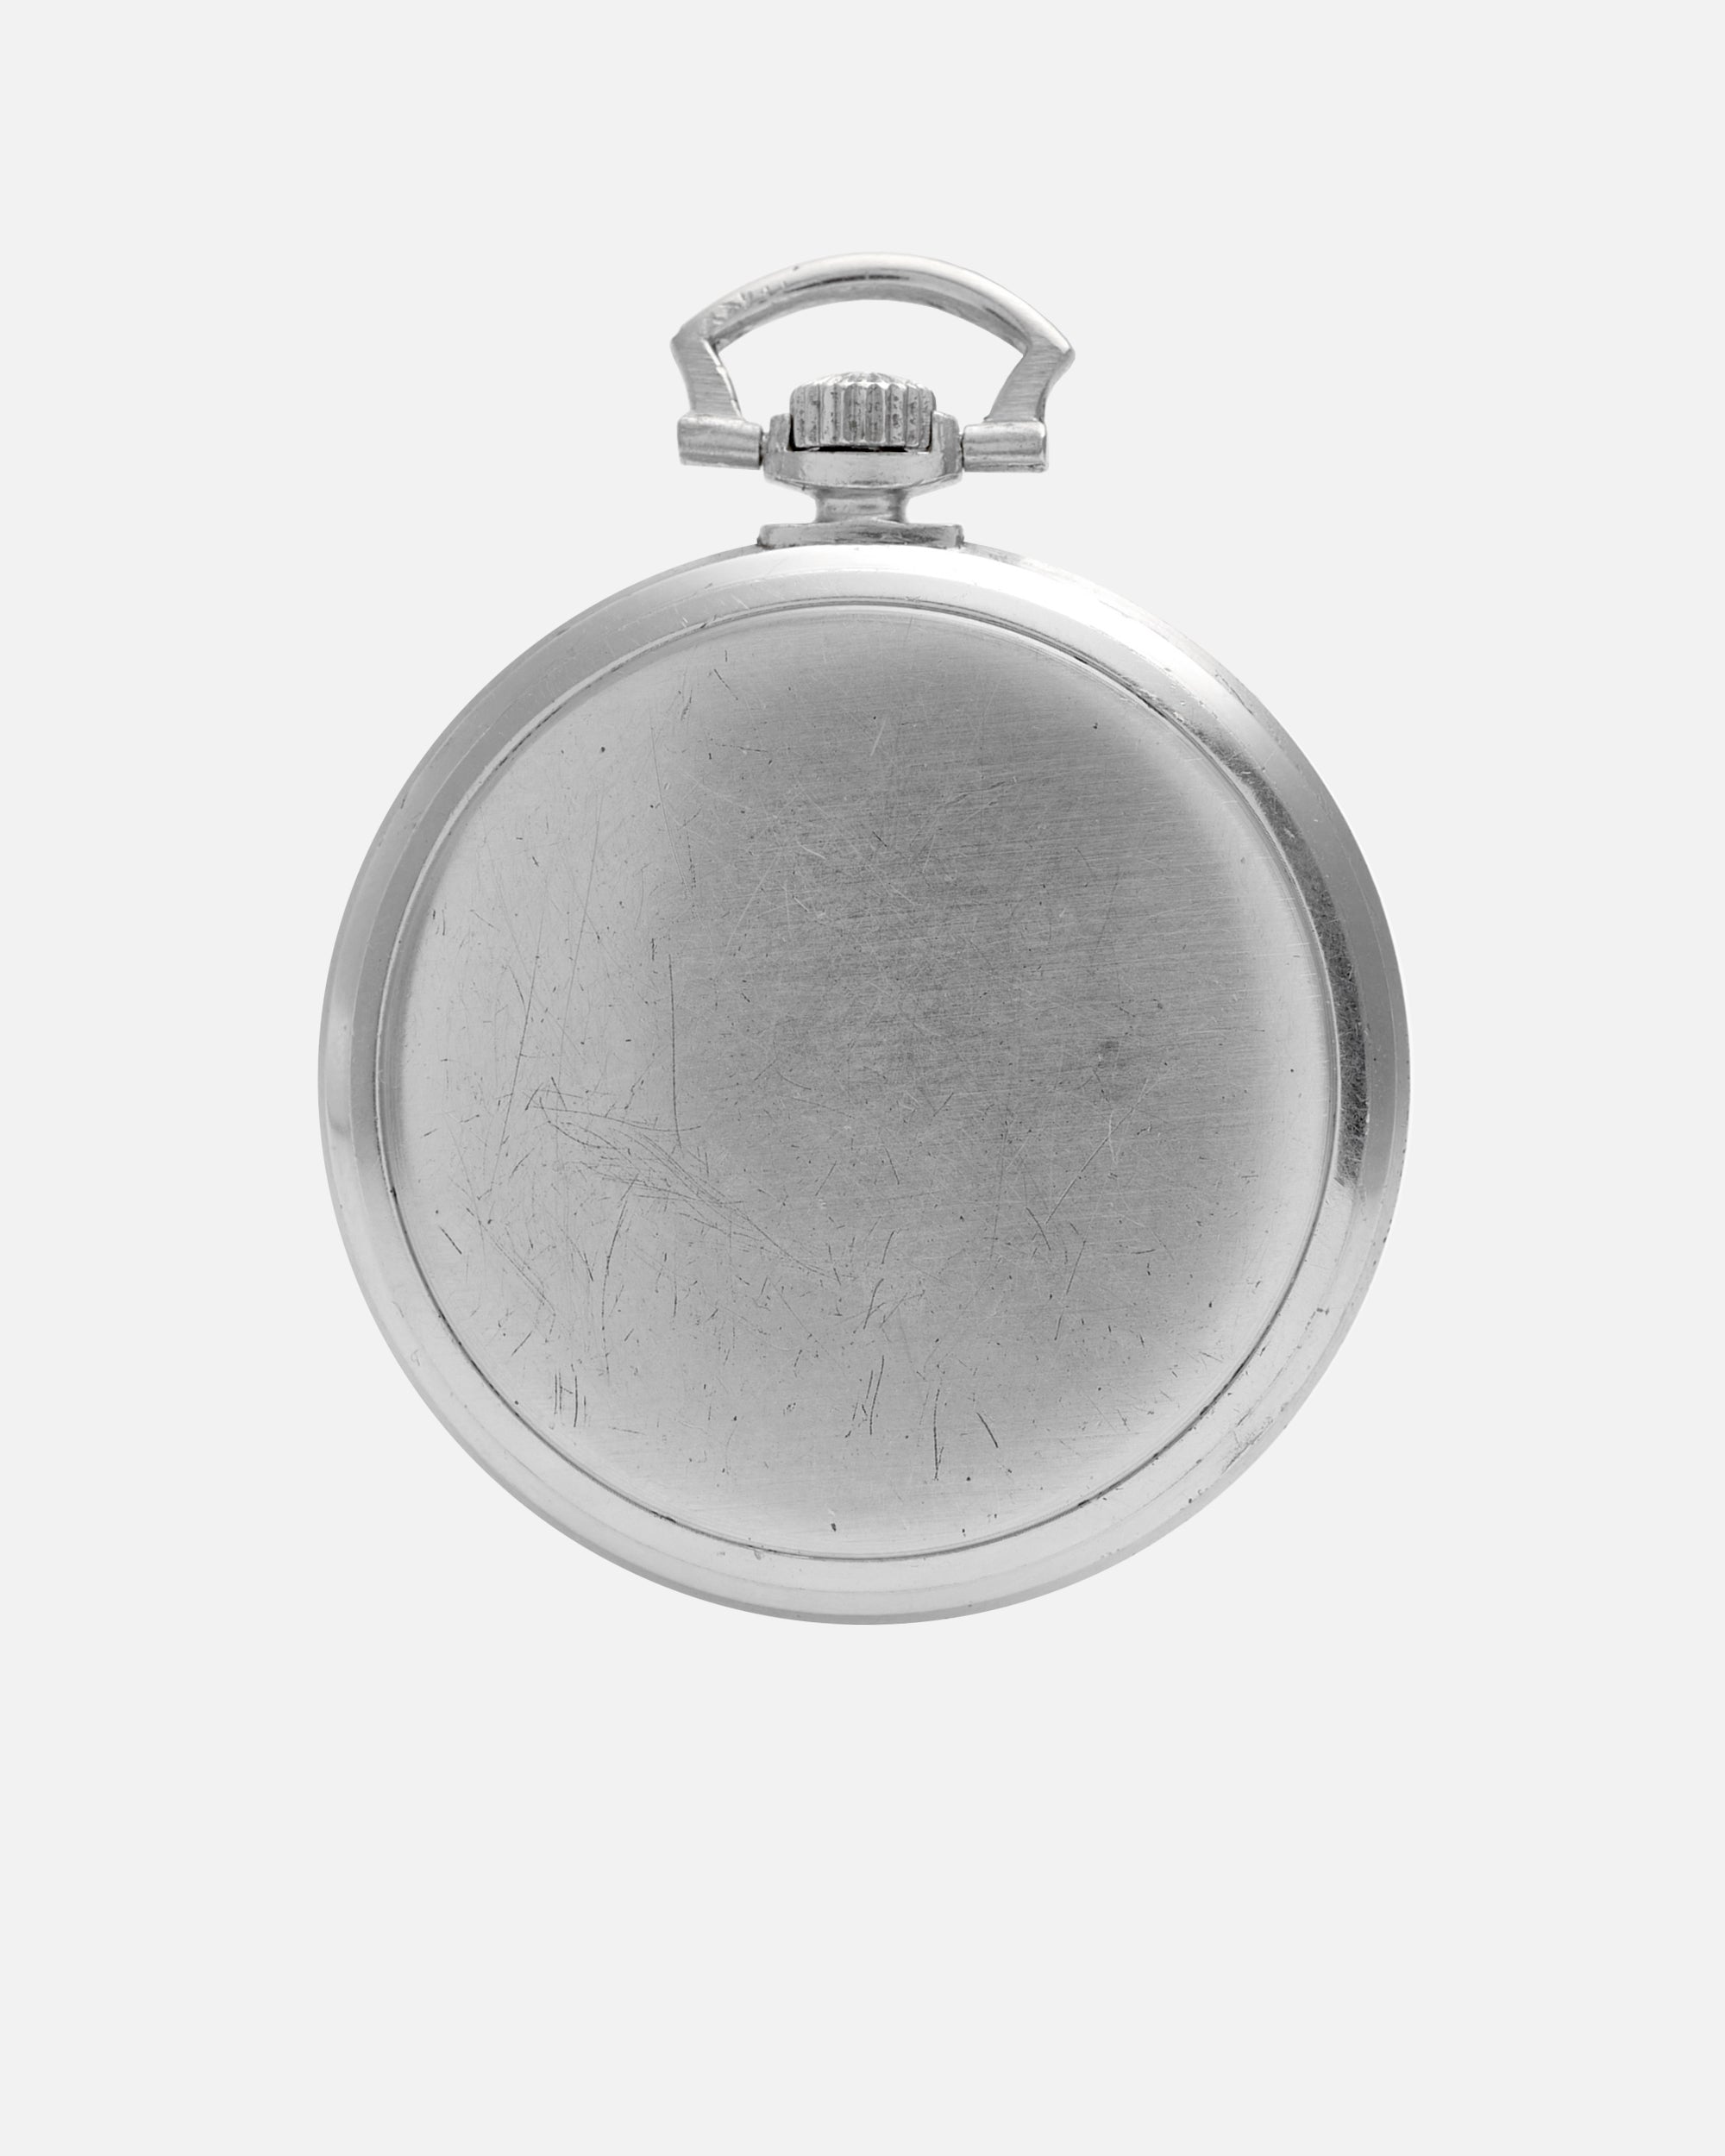 1943 Longines Pocket Watch Ref. 3450 | Sector Dial | Stepped Case | Extract From Archives